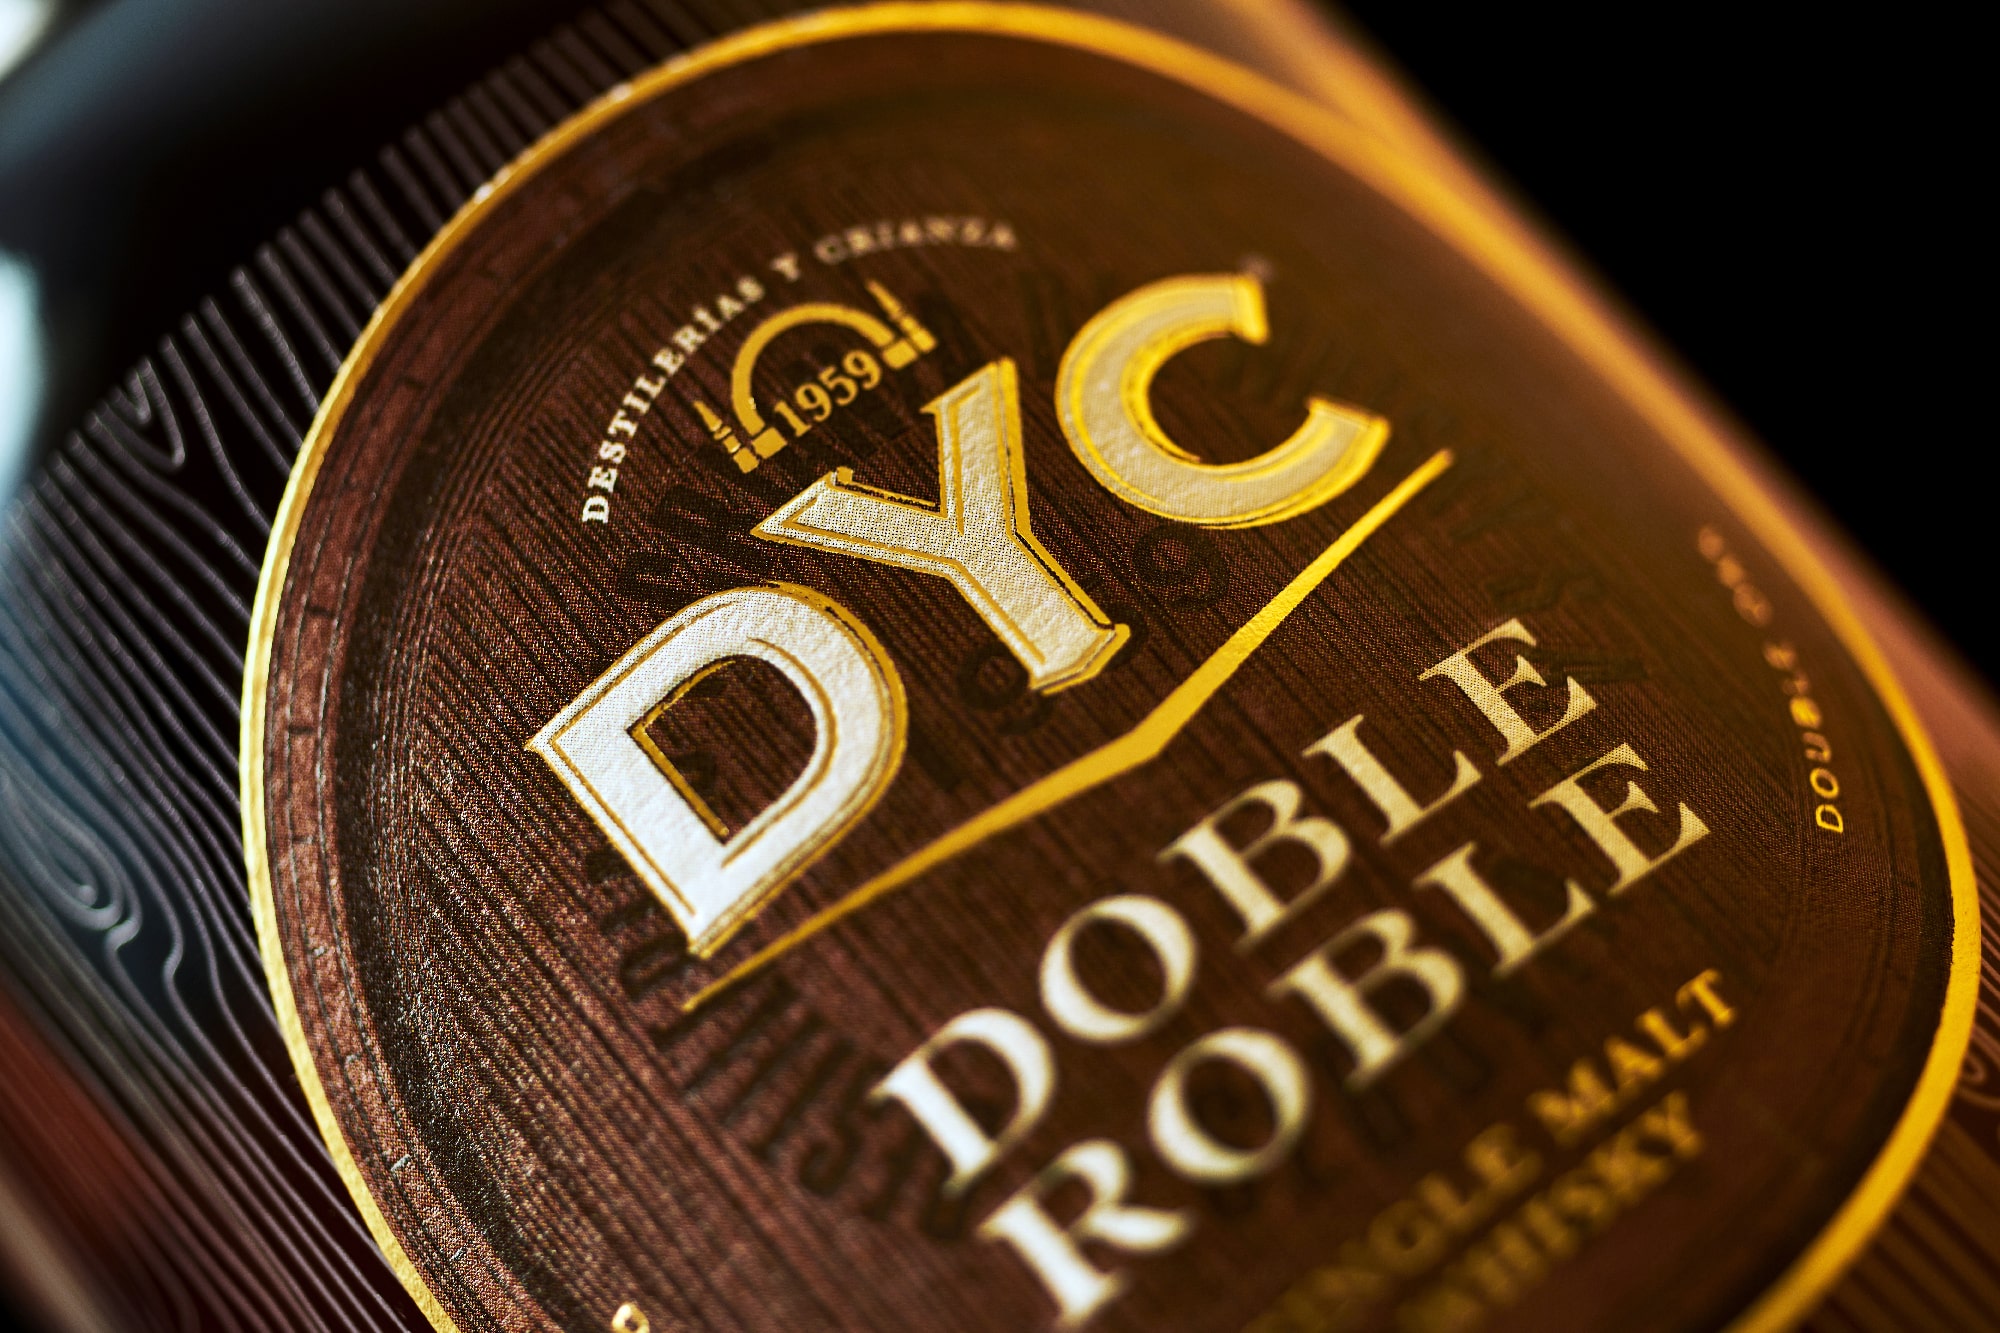 DYC Doble Roble Spanish Whiskey by Morillas Branding